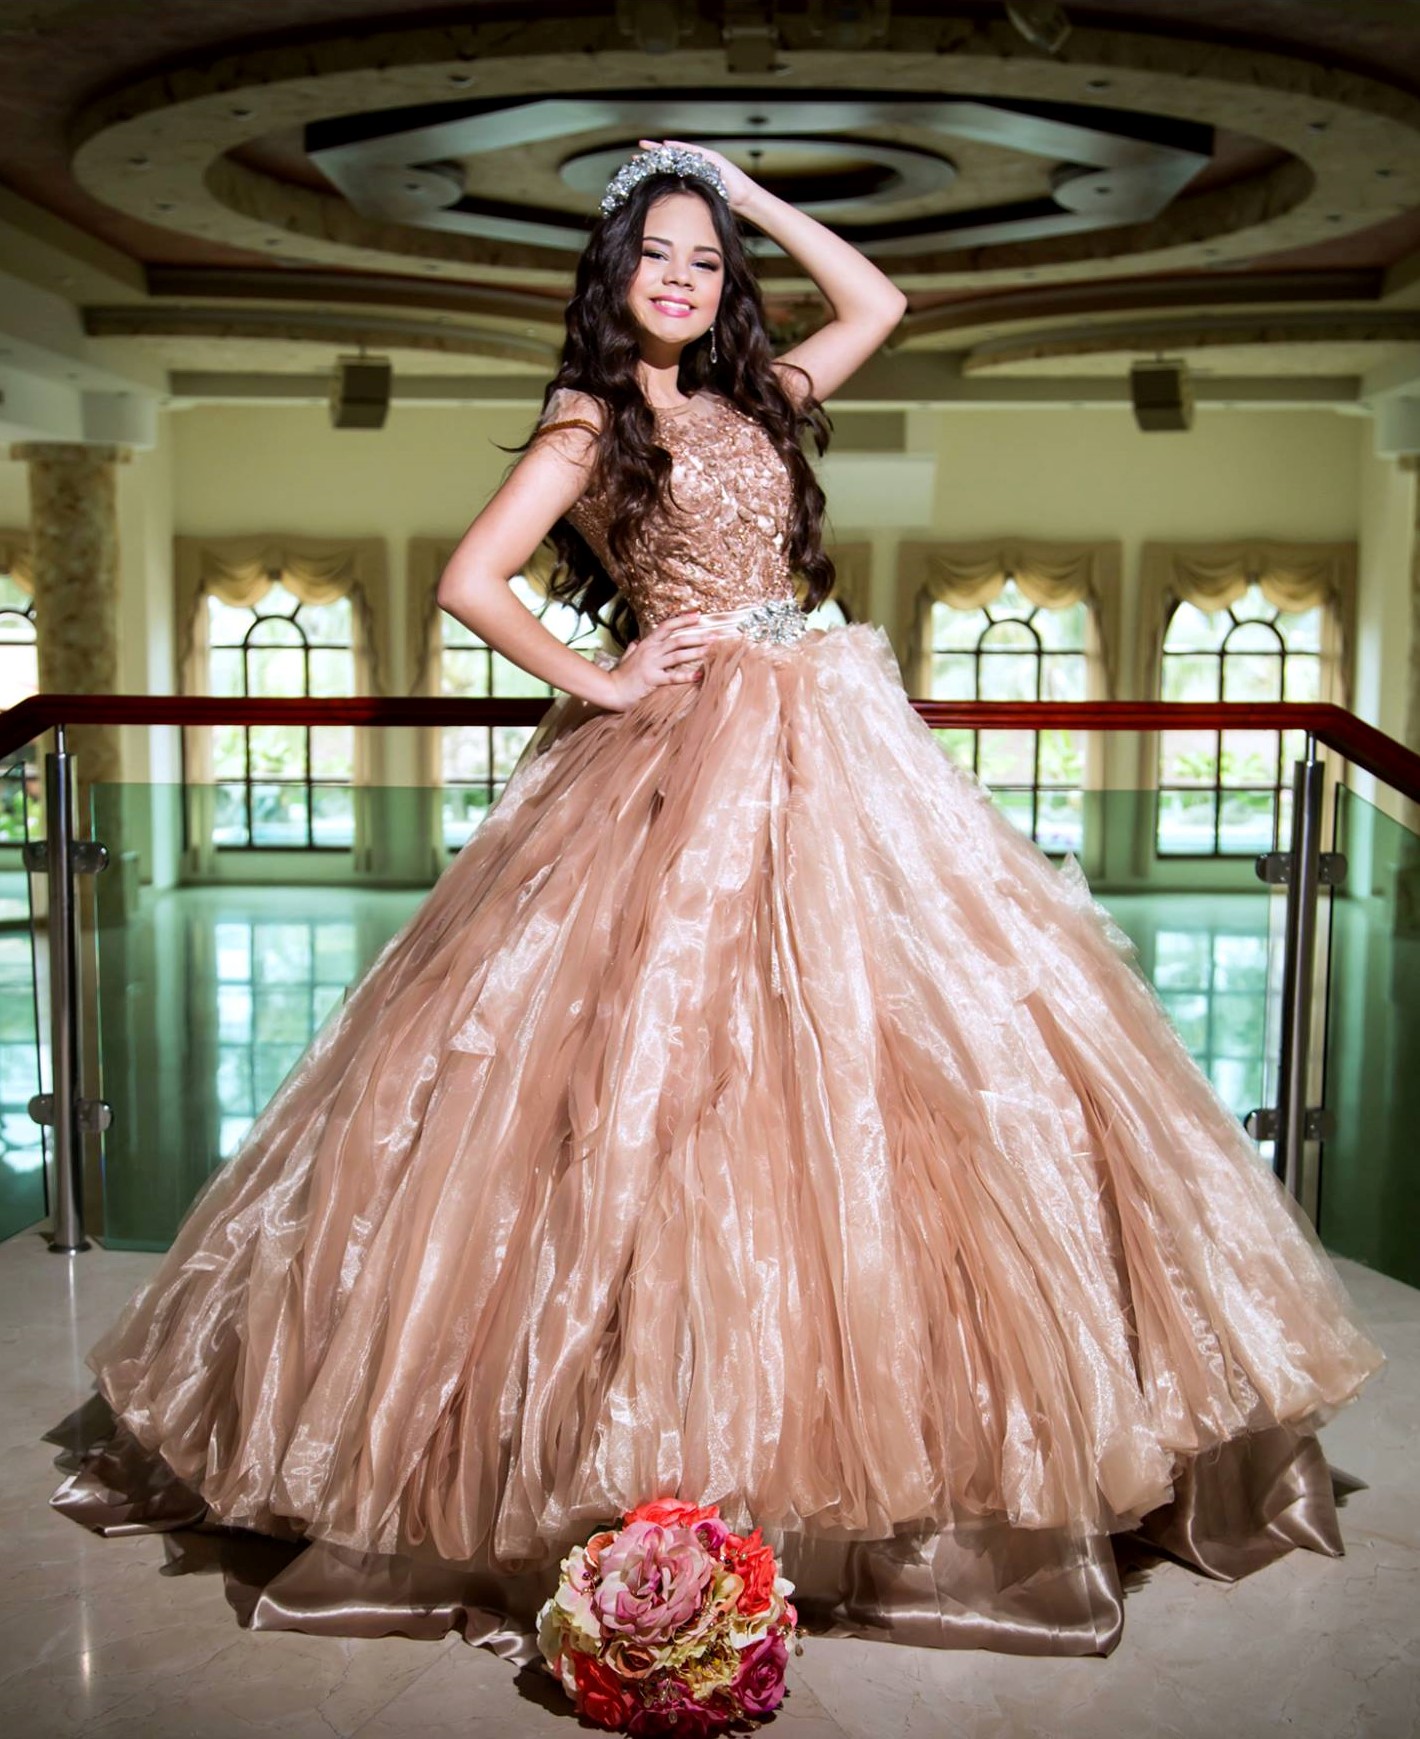 A Quinceanera woman in a ball gown posing for a picture